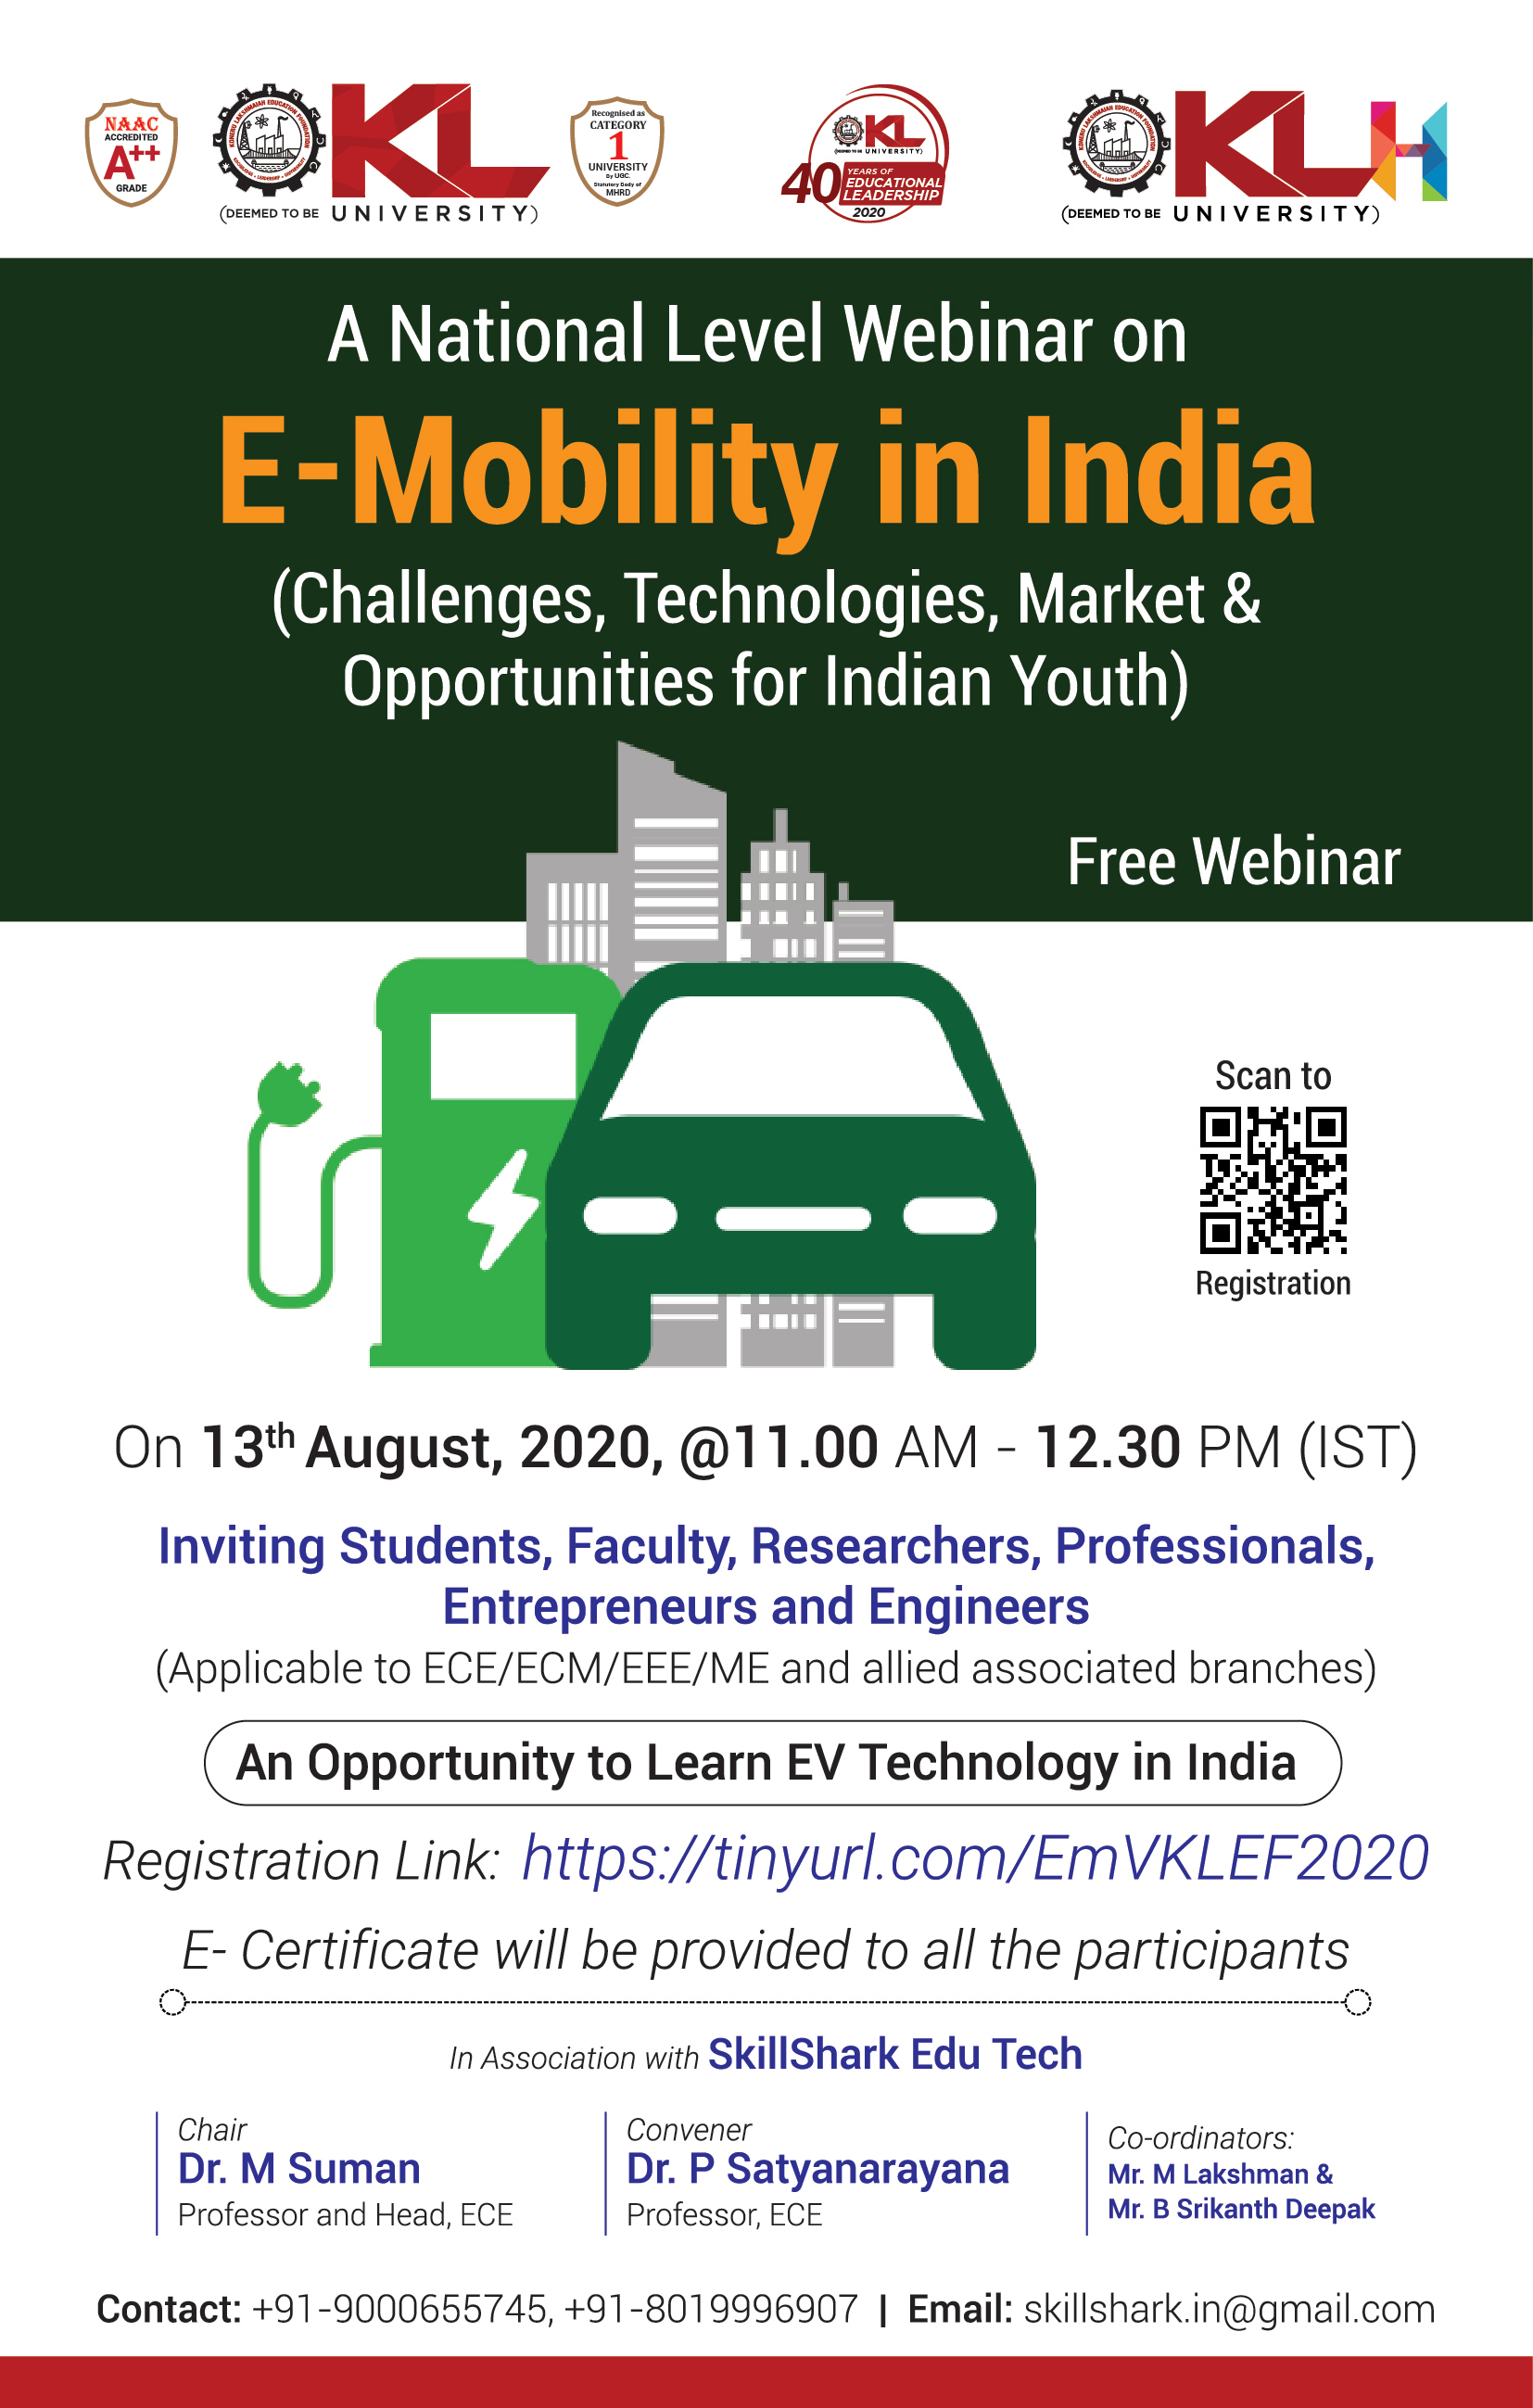 Webinar (13) on A National level webinar on E-Mobility in India on 13th August 2020.